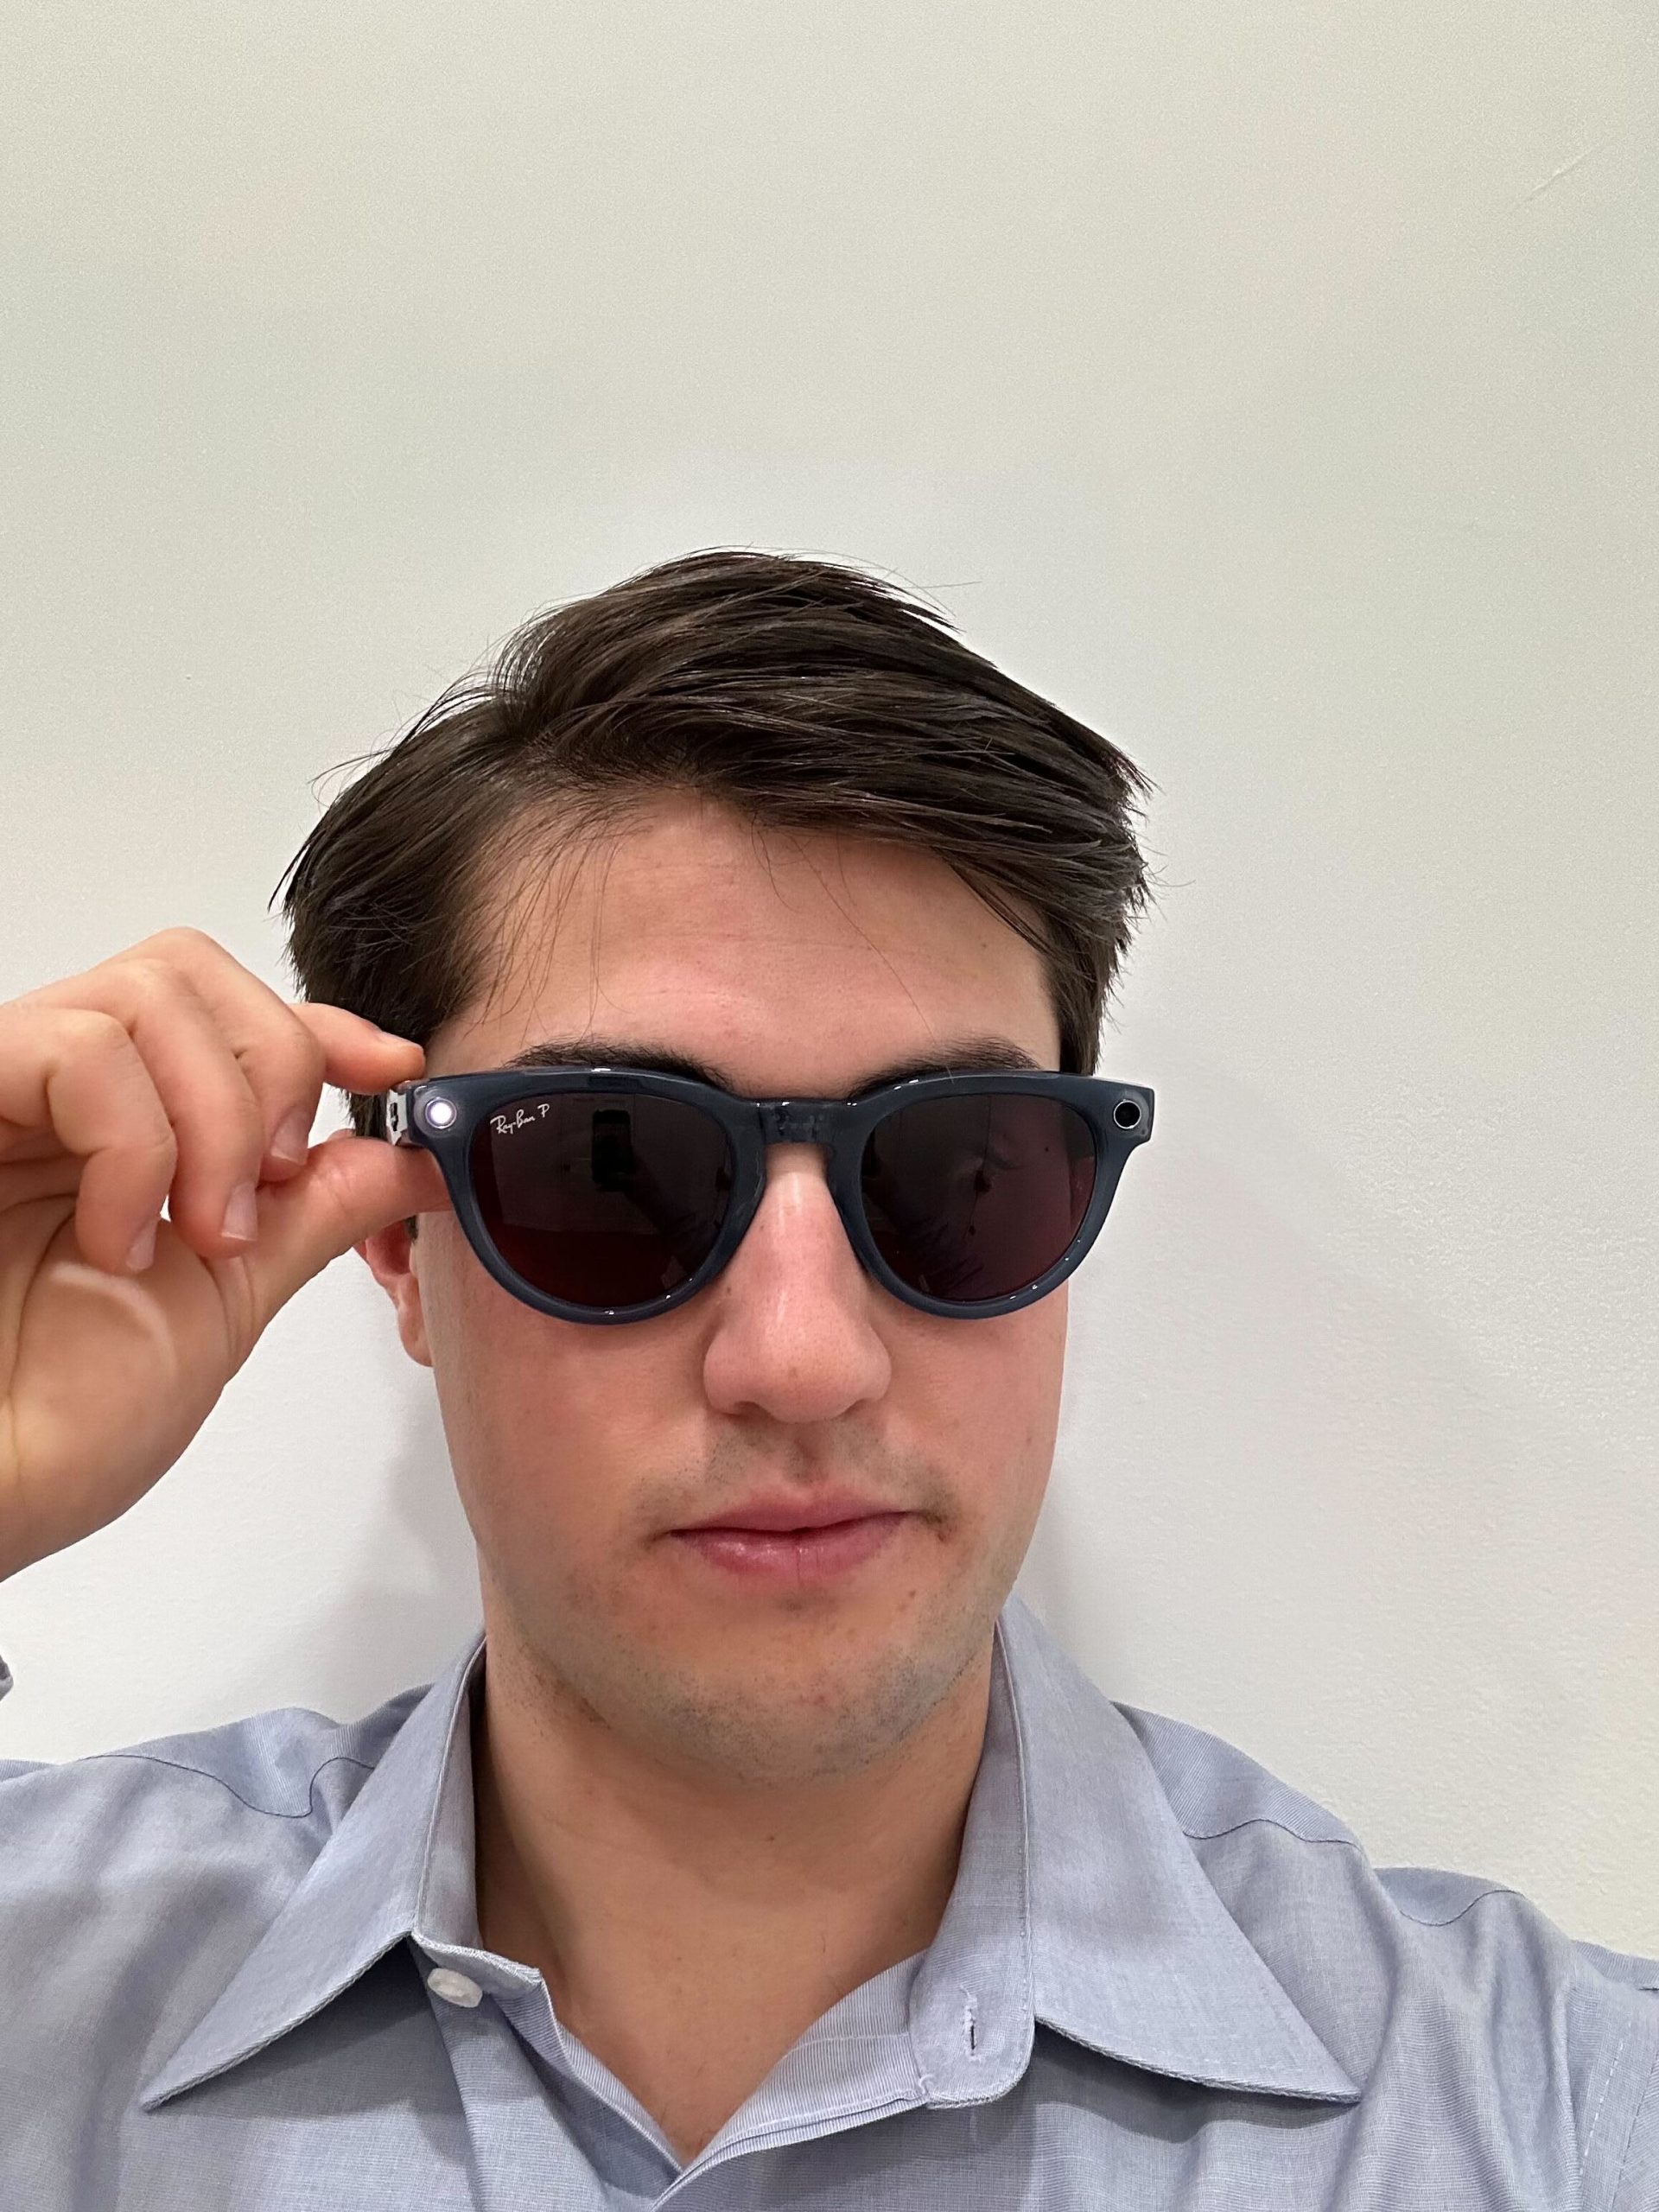 Meta's Ray-Ban smart glasses look cool and work well if you want a camera on your face